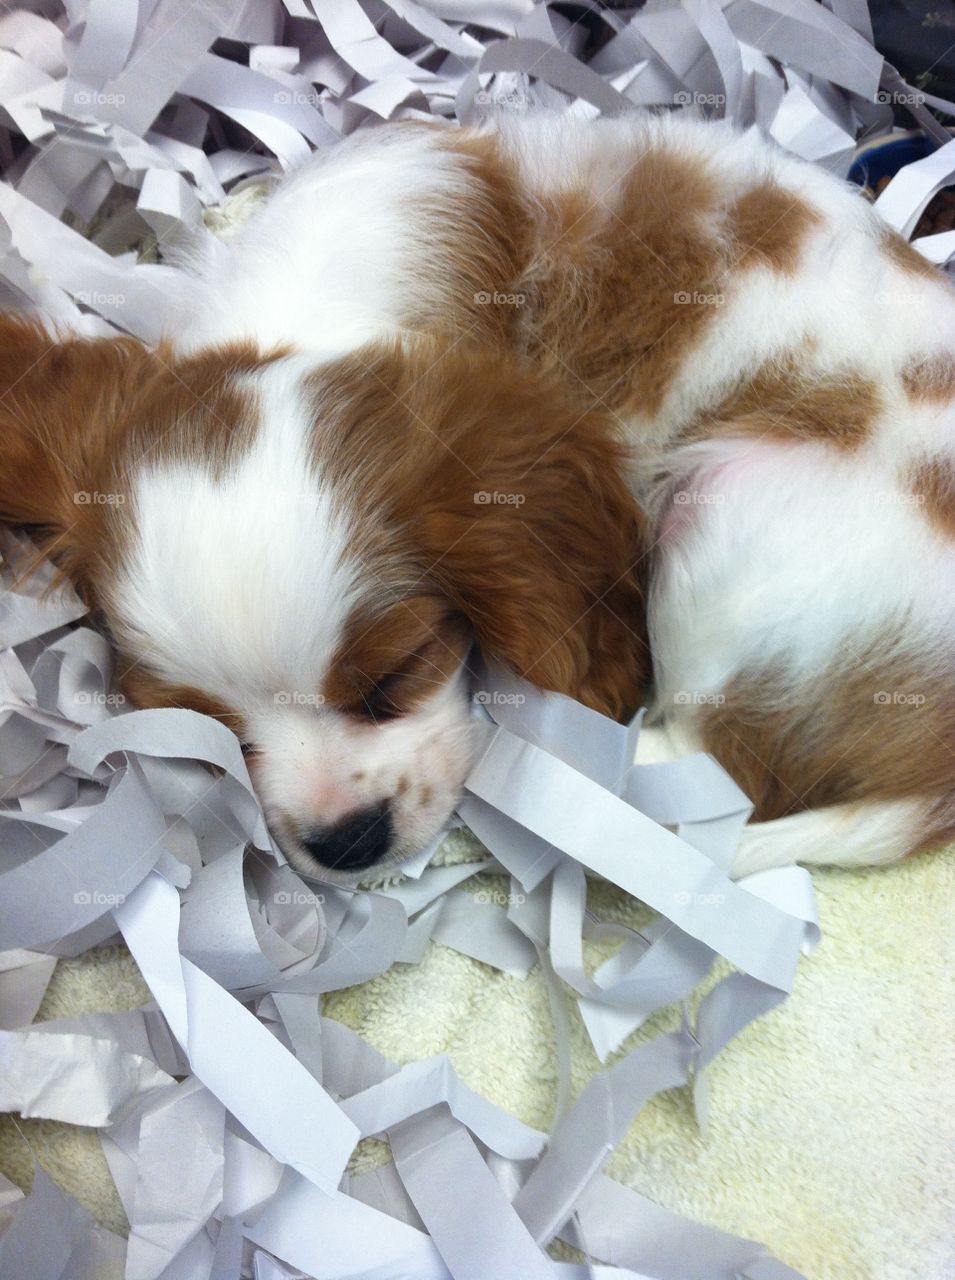 Napping Cavalier King Charles Spaniel puppy